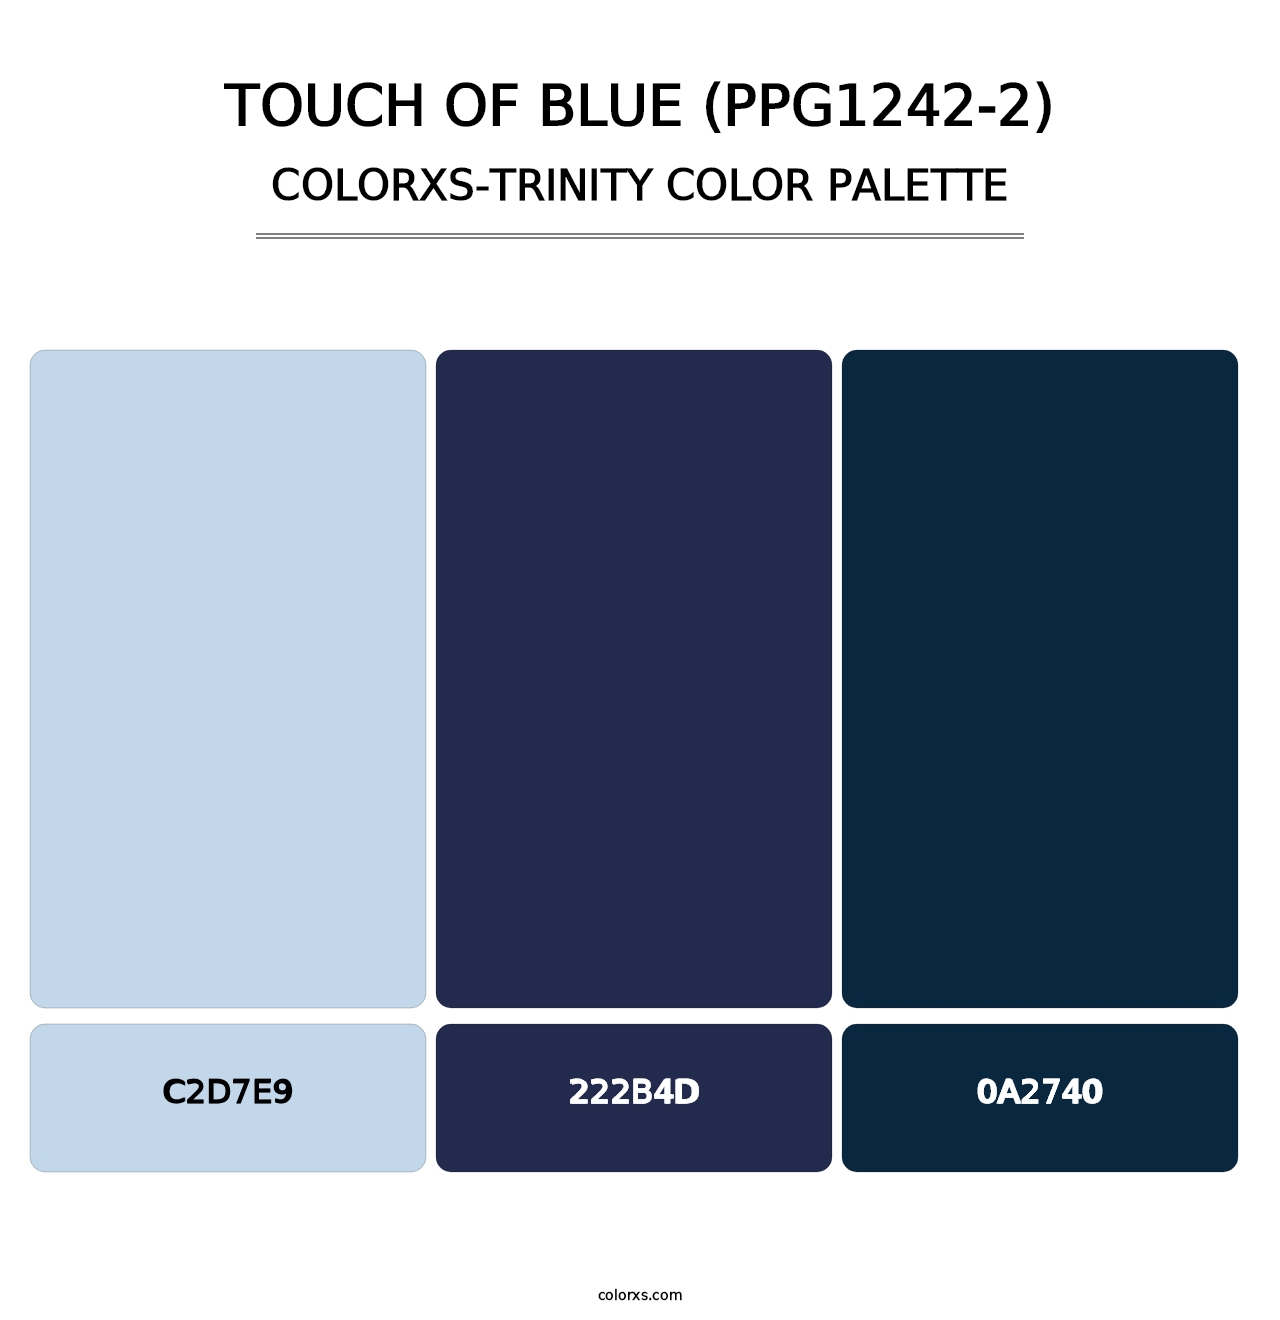 Touch Of Blue (PPG1242-2) - Colorxs Trinity Palette